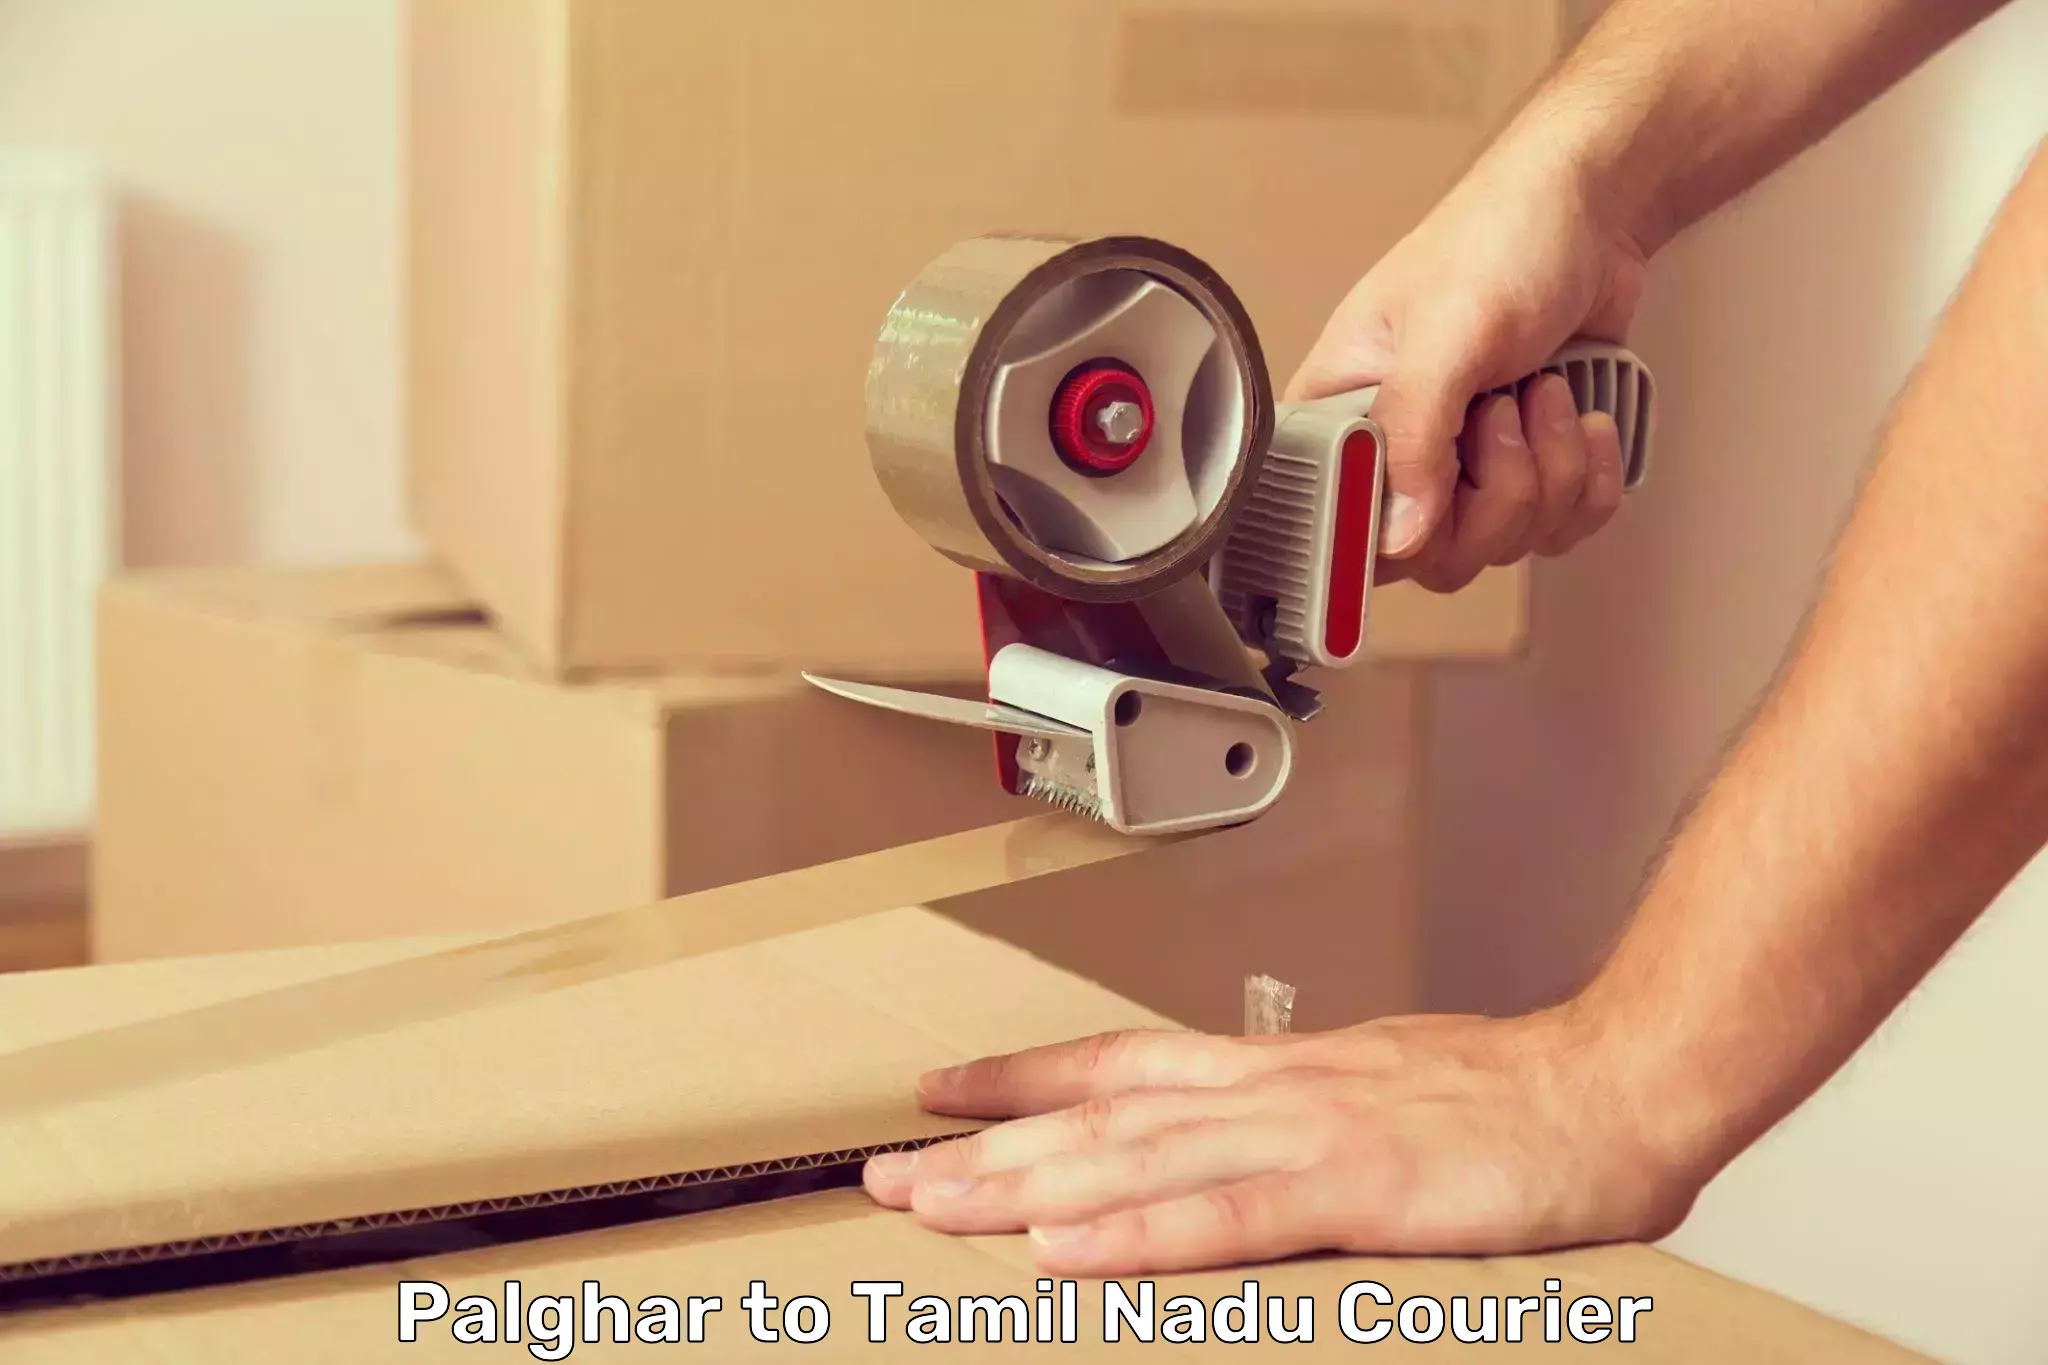 Professional courier services Palghar to Perambalur